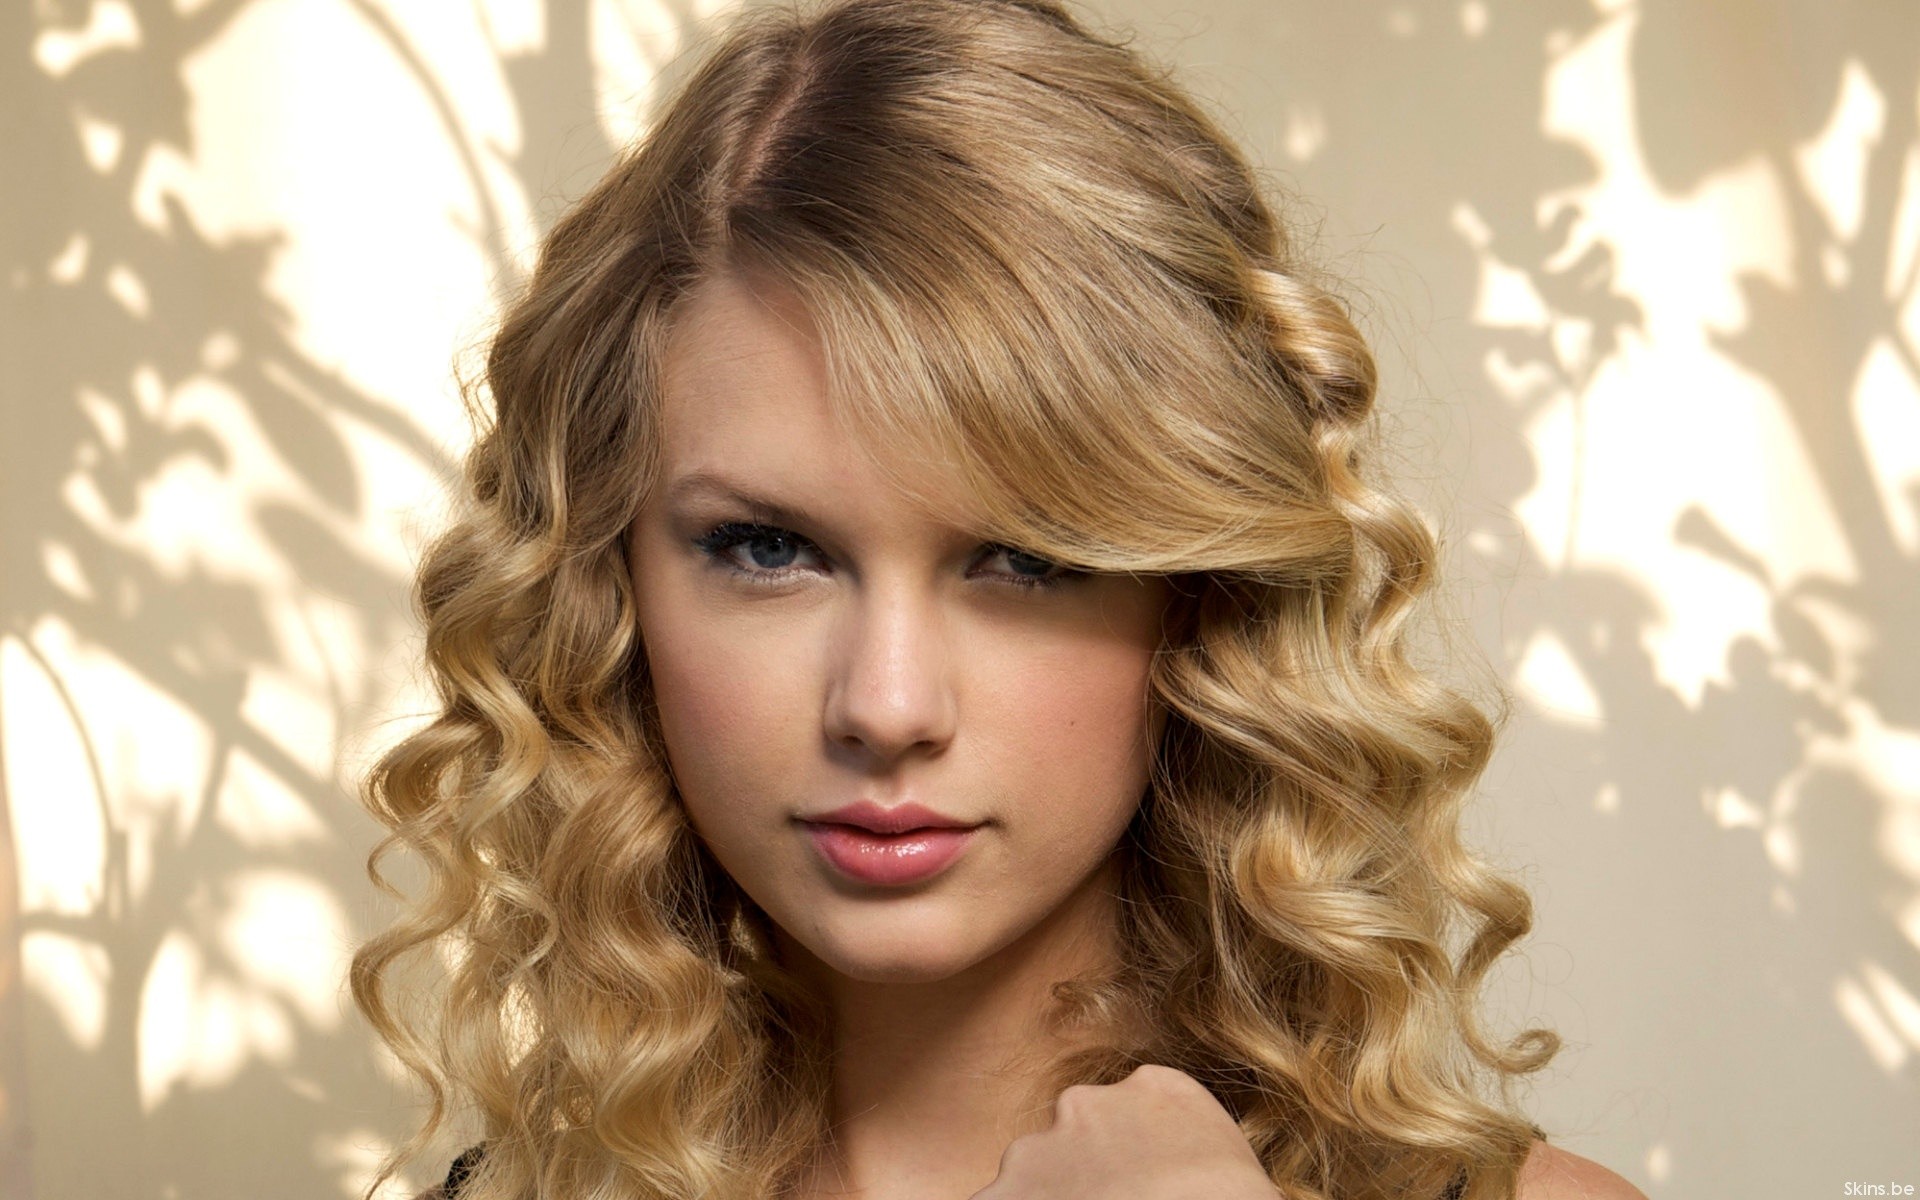 So Here S Gorgeous Taylor Swift Wallpaper To Adorn Your Desktop